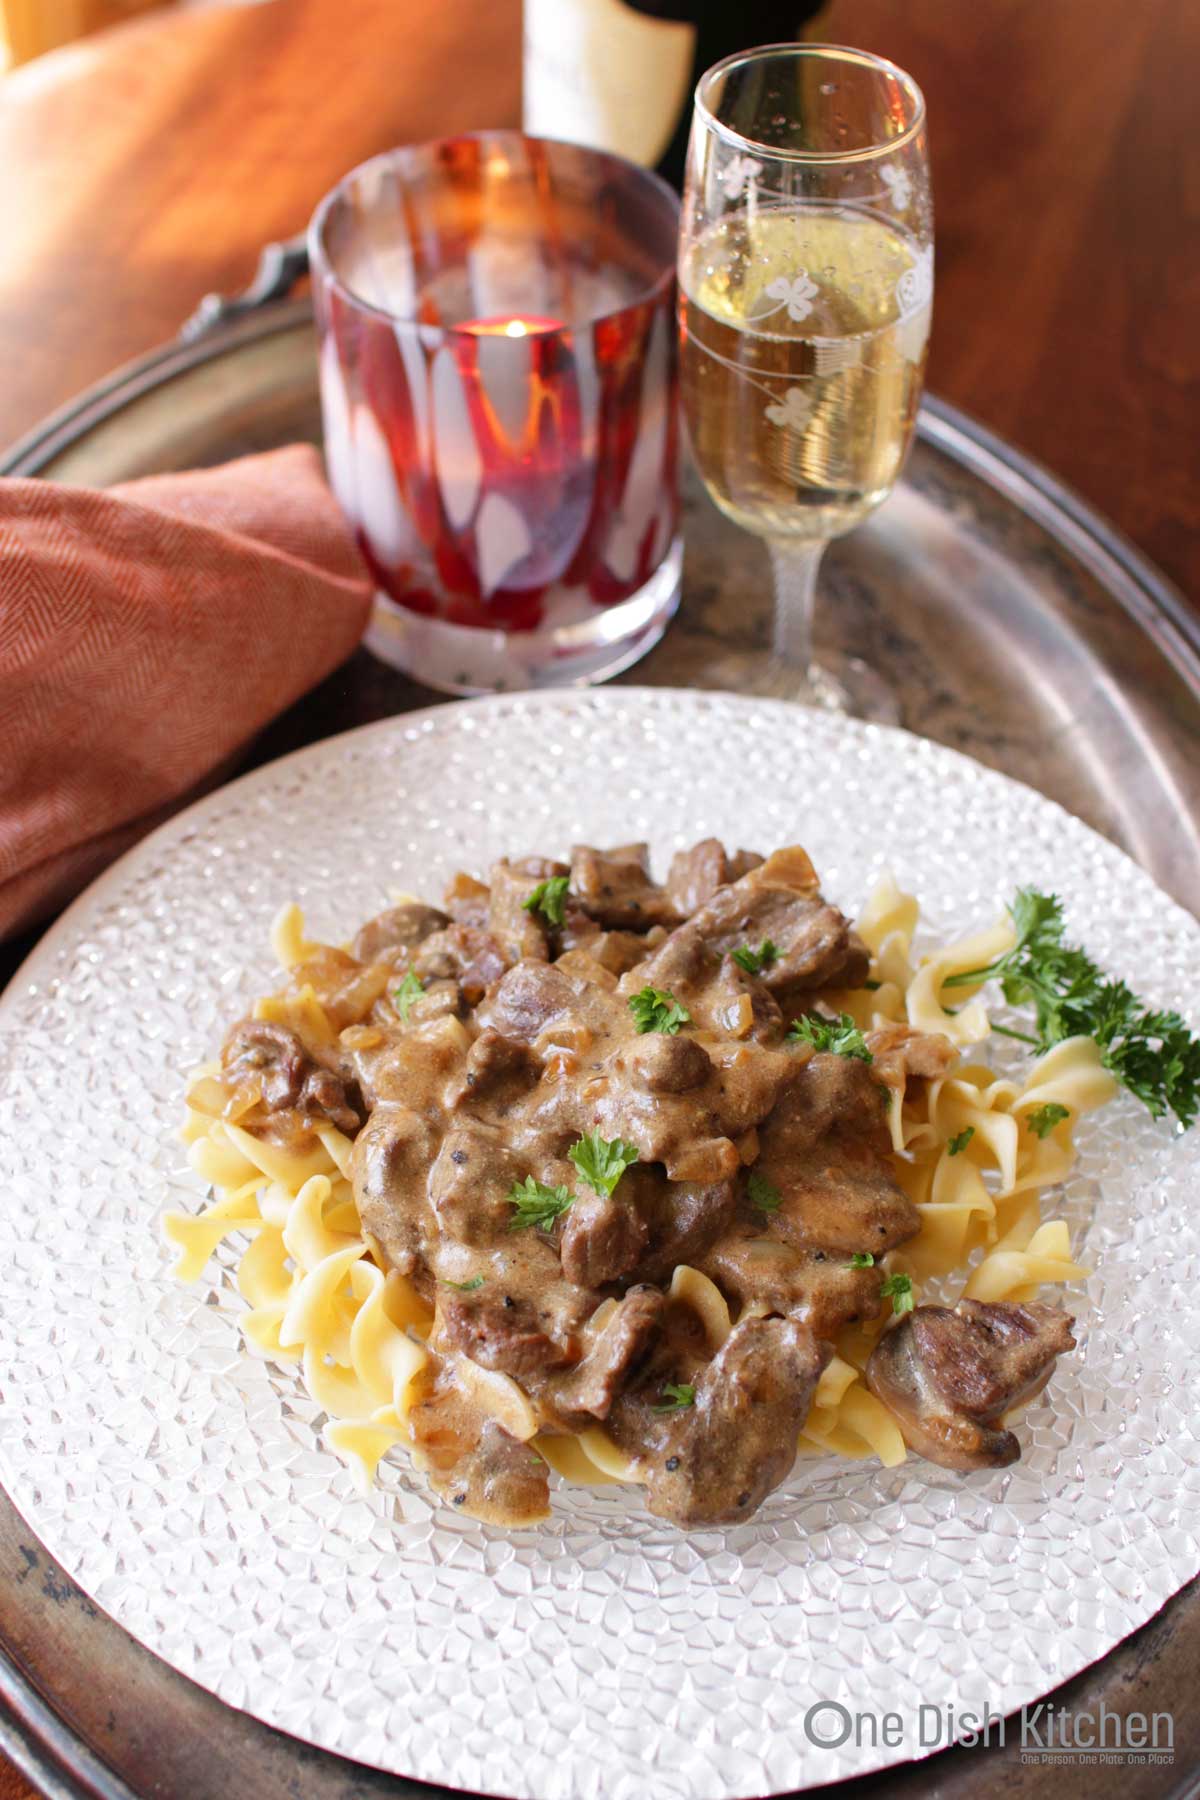 Beef stroganoff plated on a metal tray with a glass of champagne, a red candle, and a red cloth napkin.